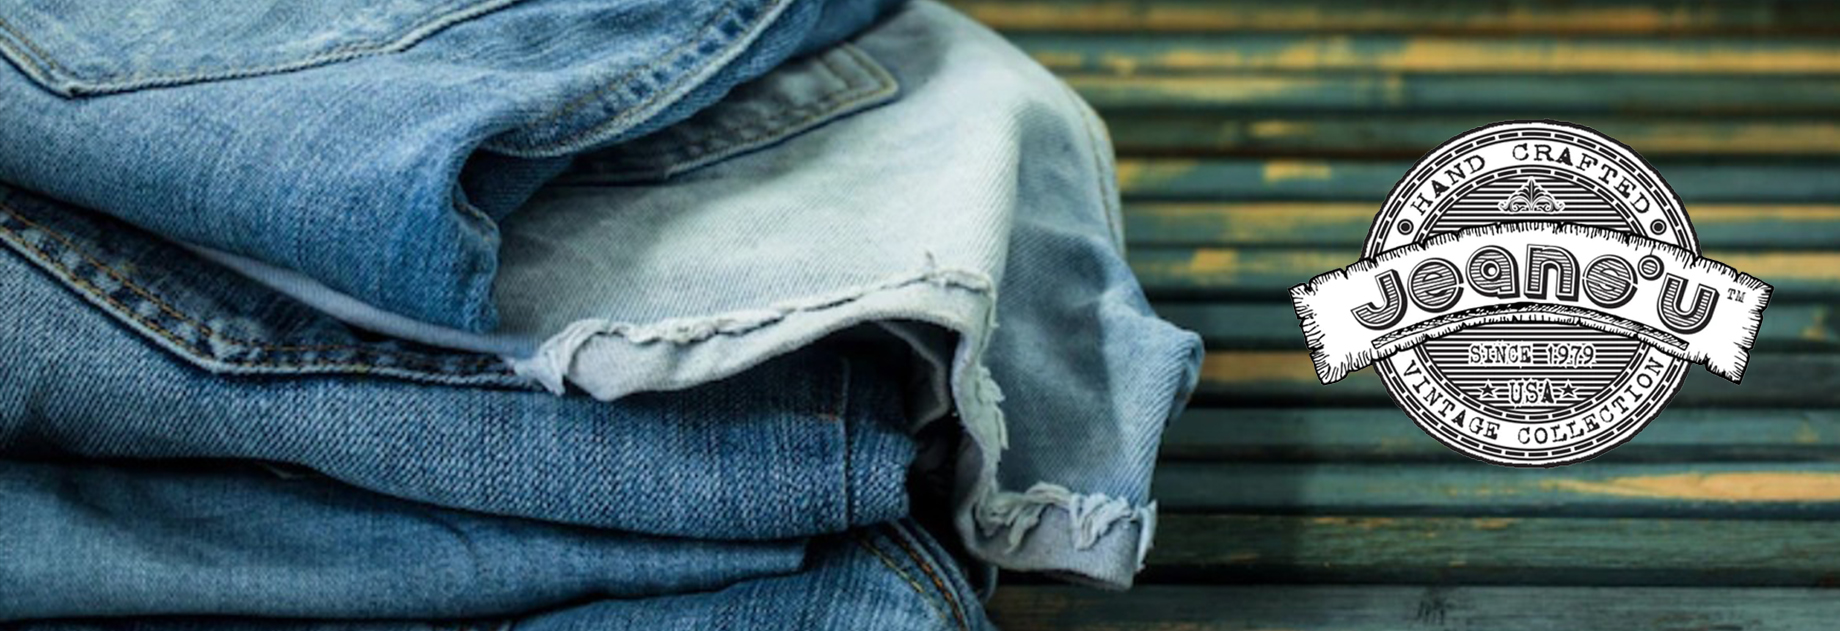 Upcycle Blue Jeans: Craft Ideas for Repurposing Old Jeans